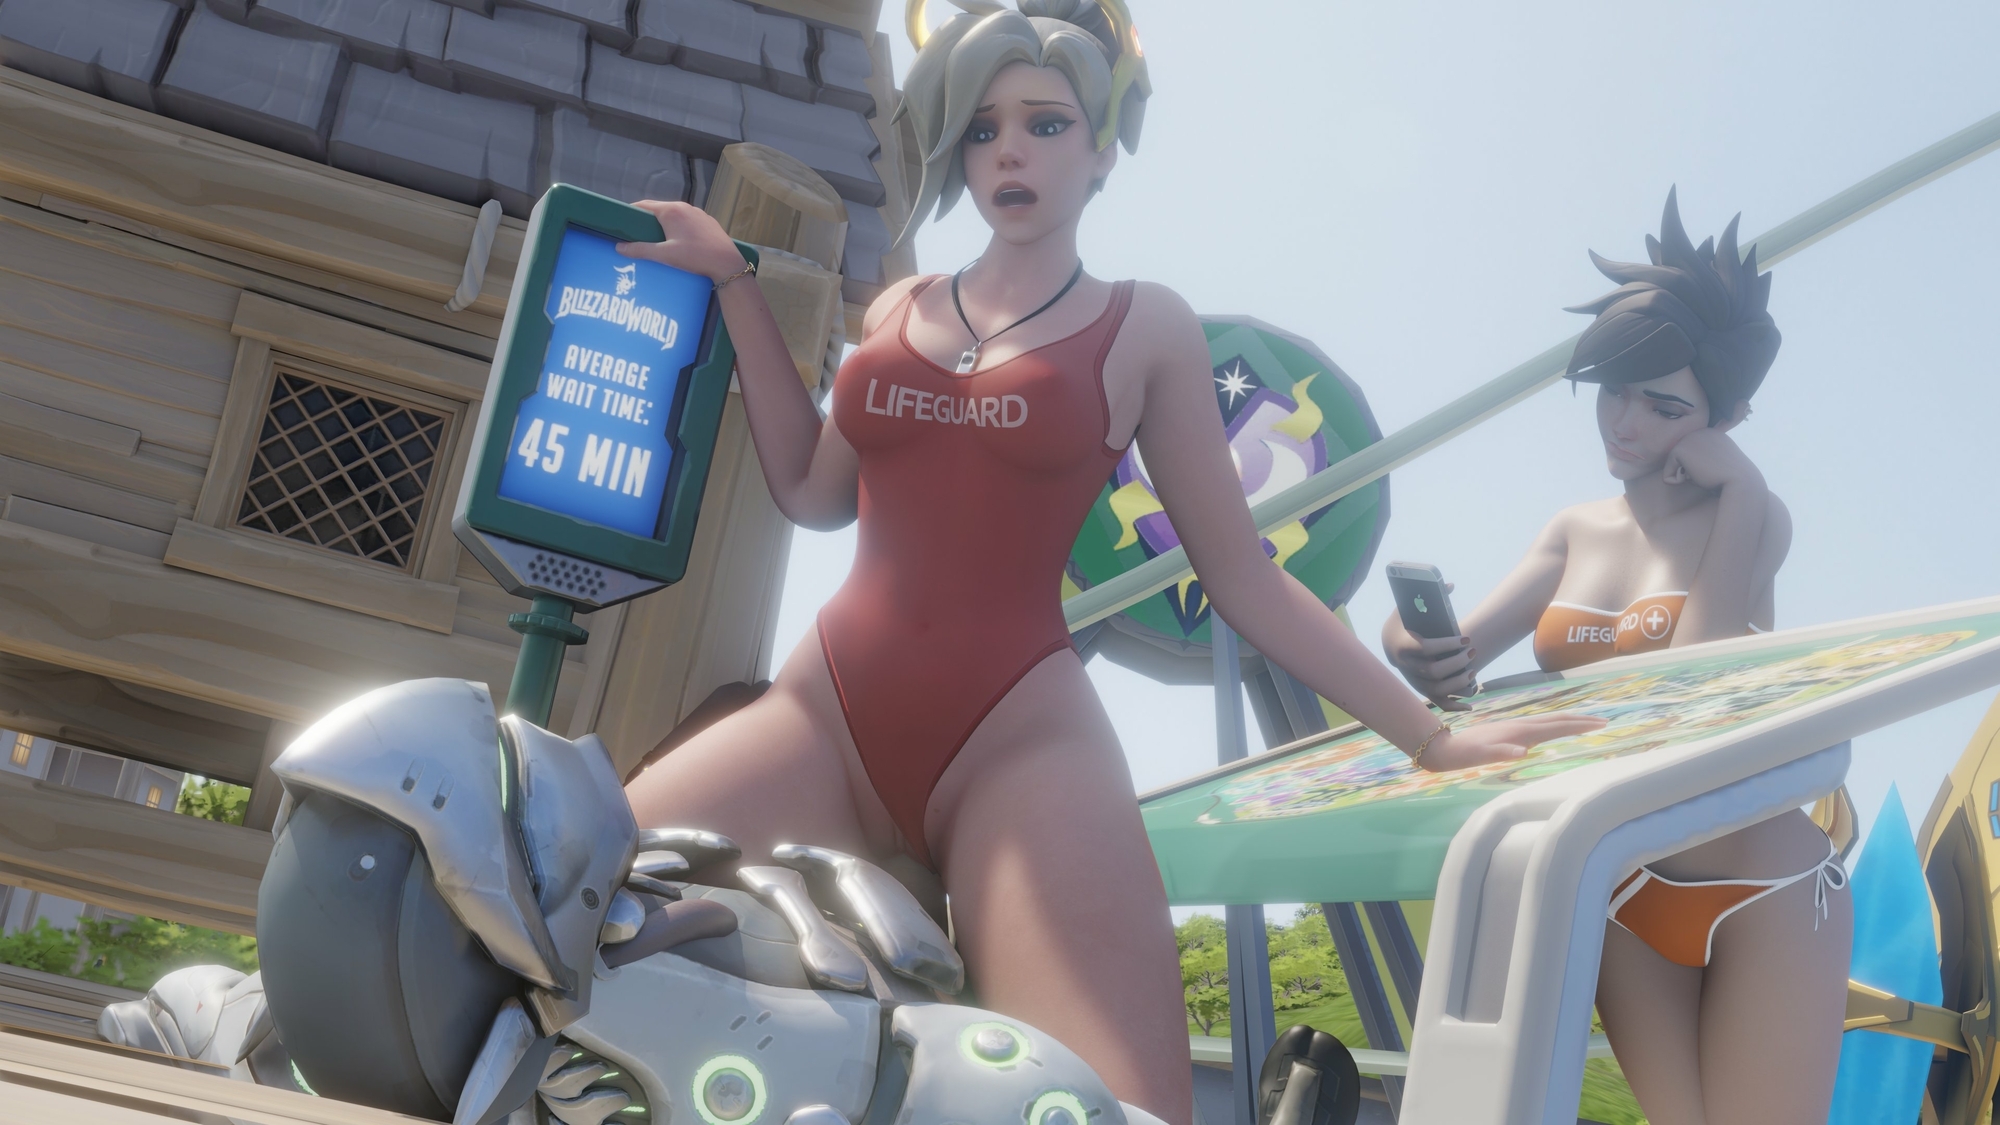 Mercy Lifeguard Average Wait Time Mercy Tracer Lifeguard 3d Porn Moaning Cowgirl Bouncing Boobs Baywatch Outdoor Sex Pussy Penetration Selfie 3